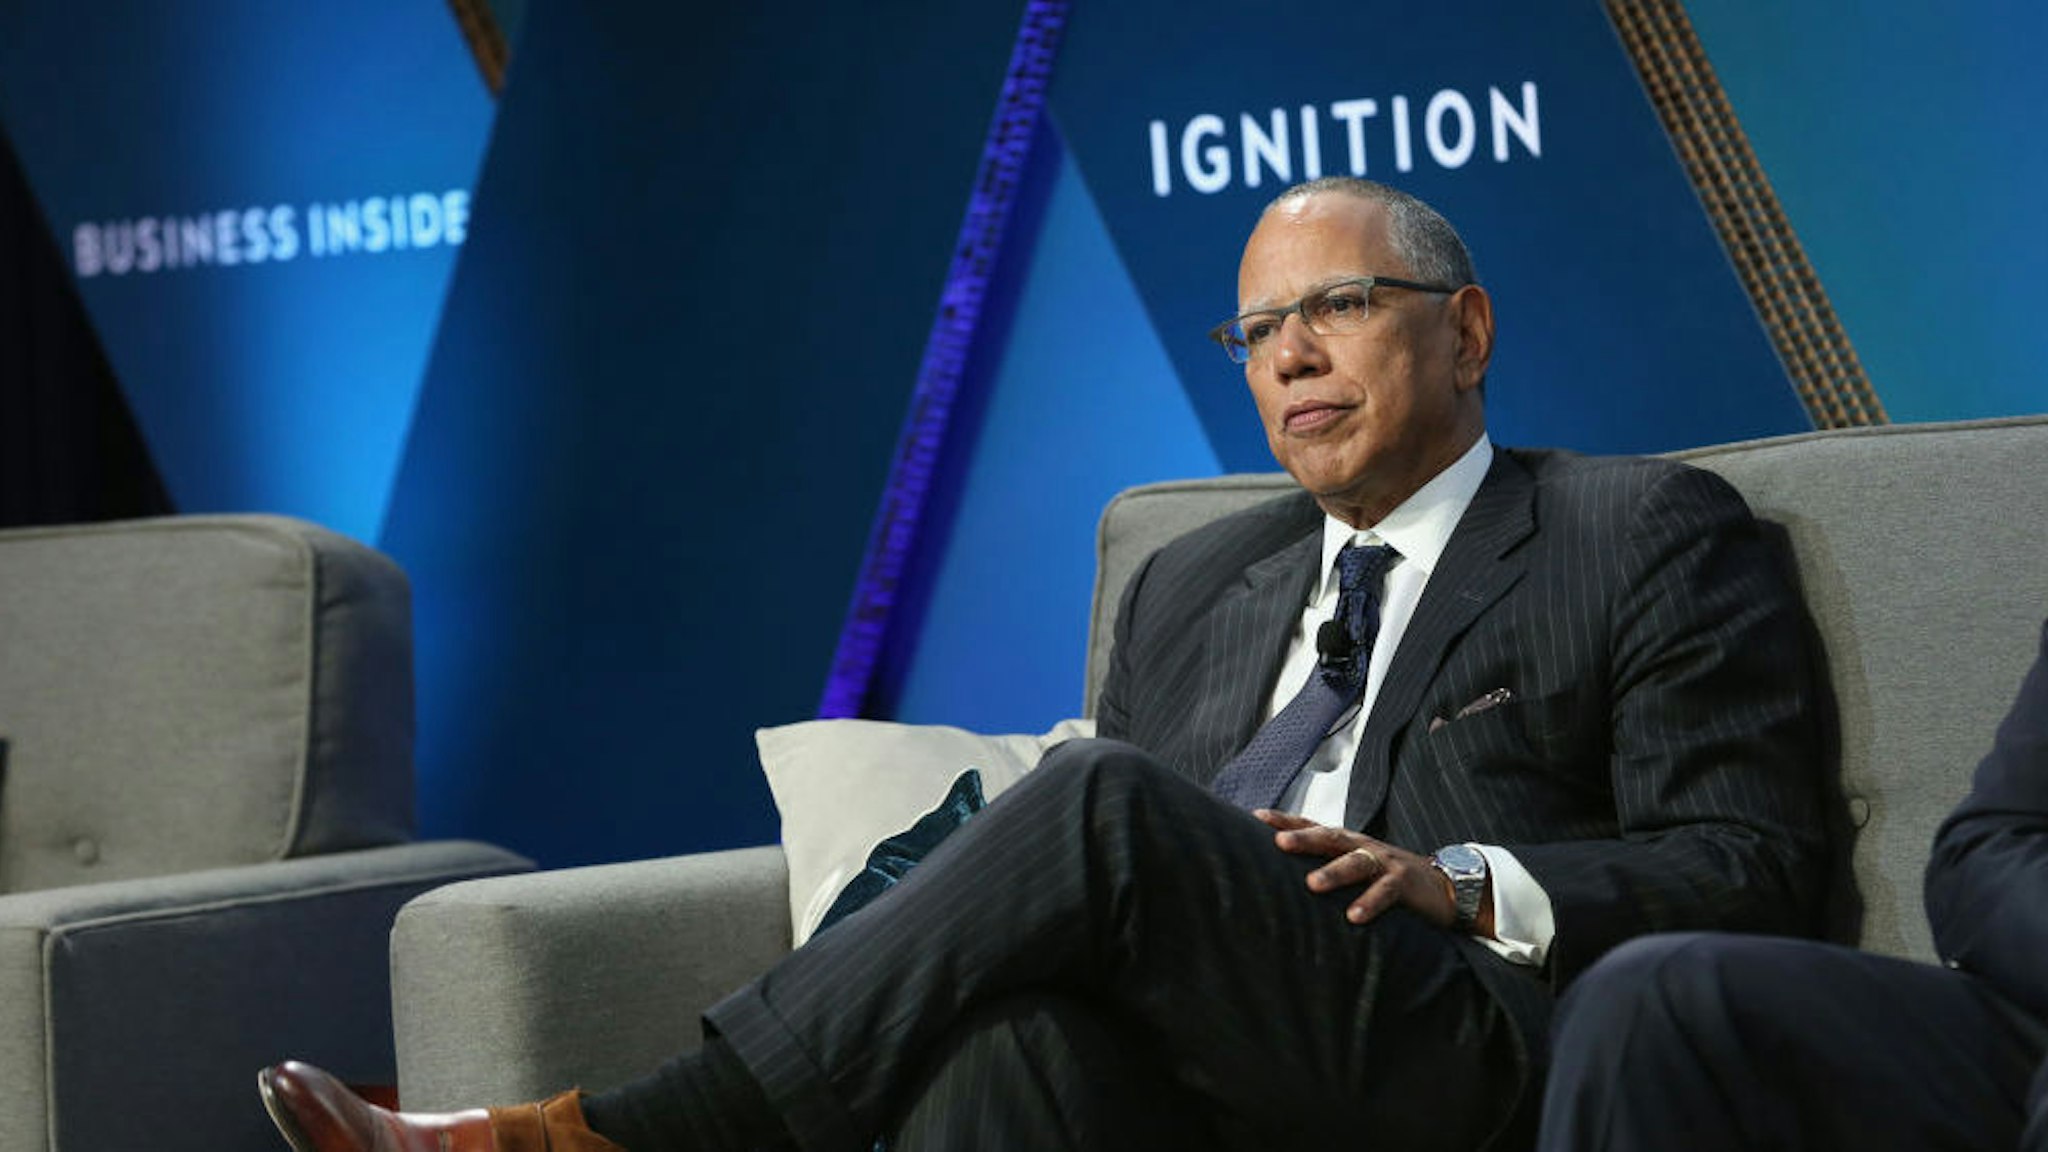 Dean Baquet, executive editor of The New York Times, speaks onstage at IGNITION: Future of Media at Time Warner Center on November 30, 2017 in New York City.